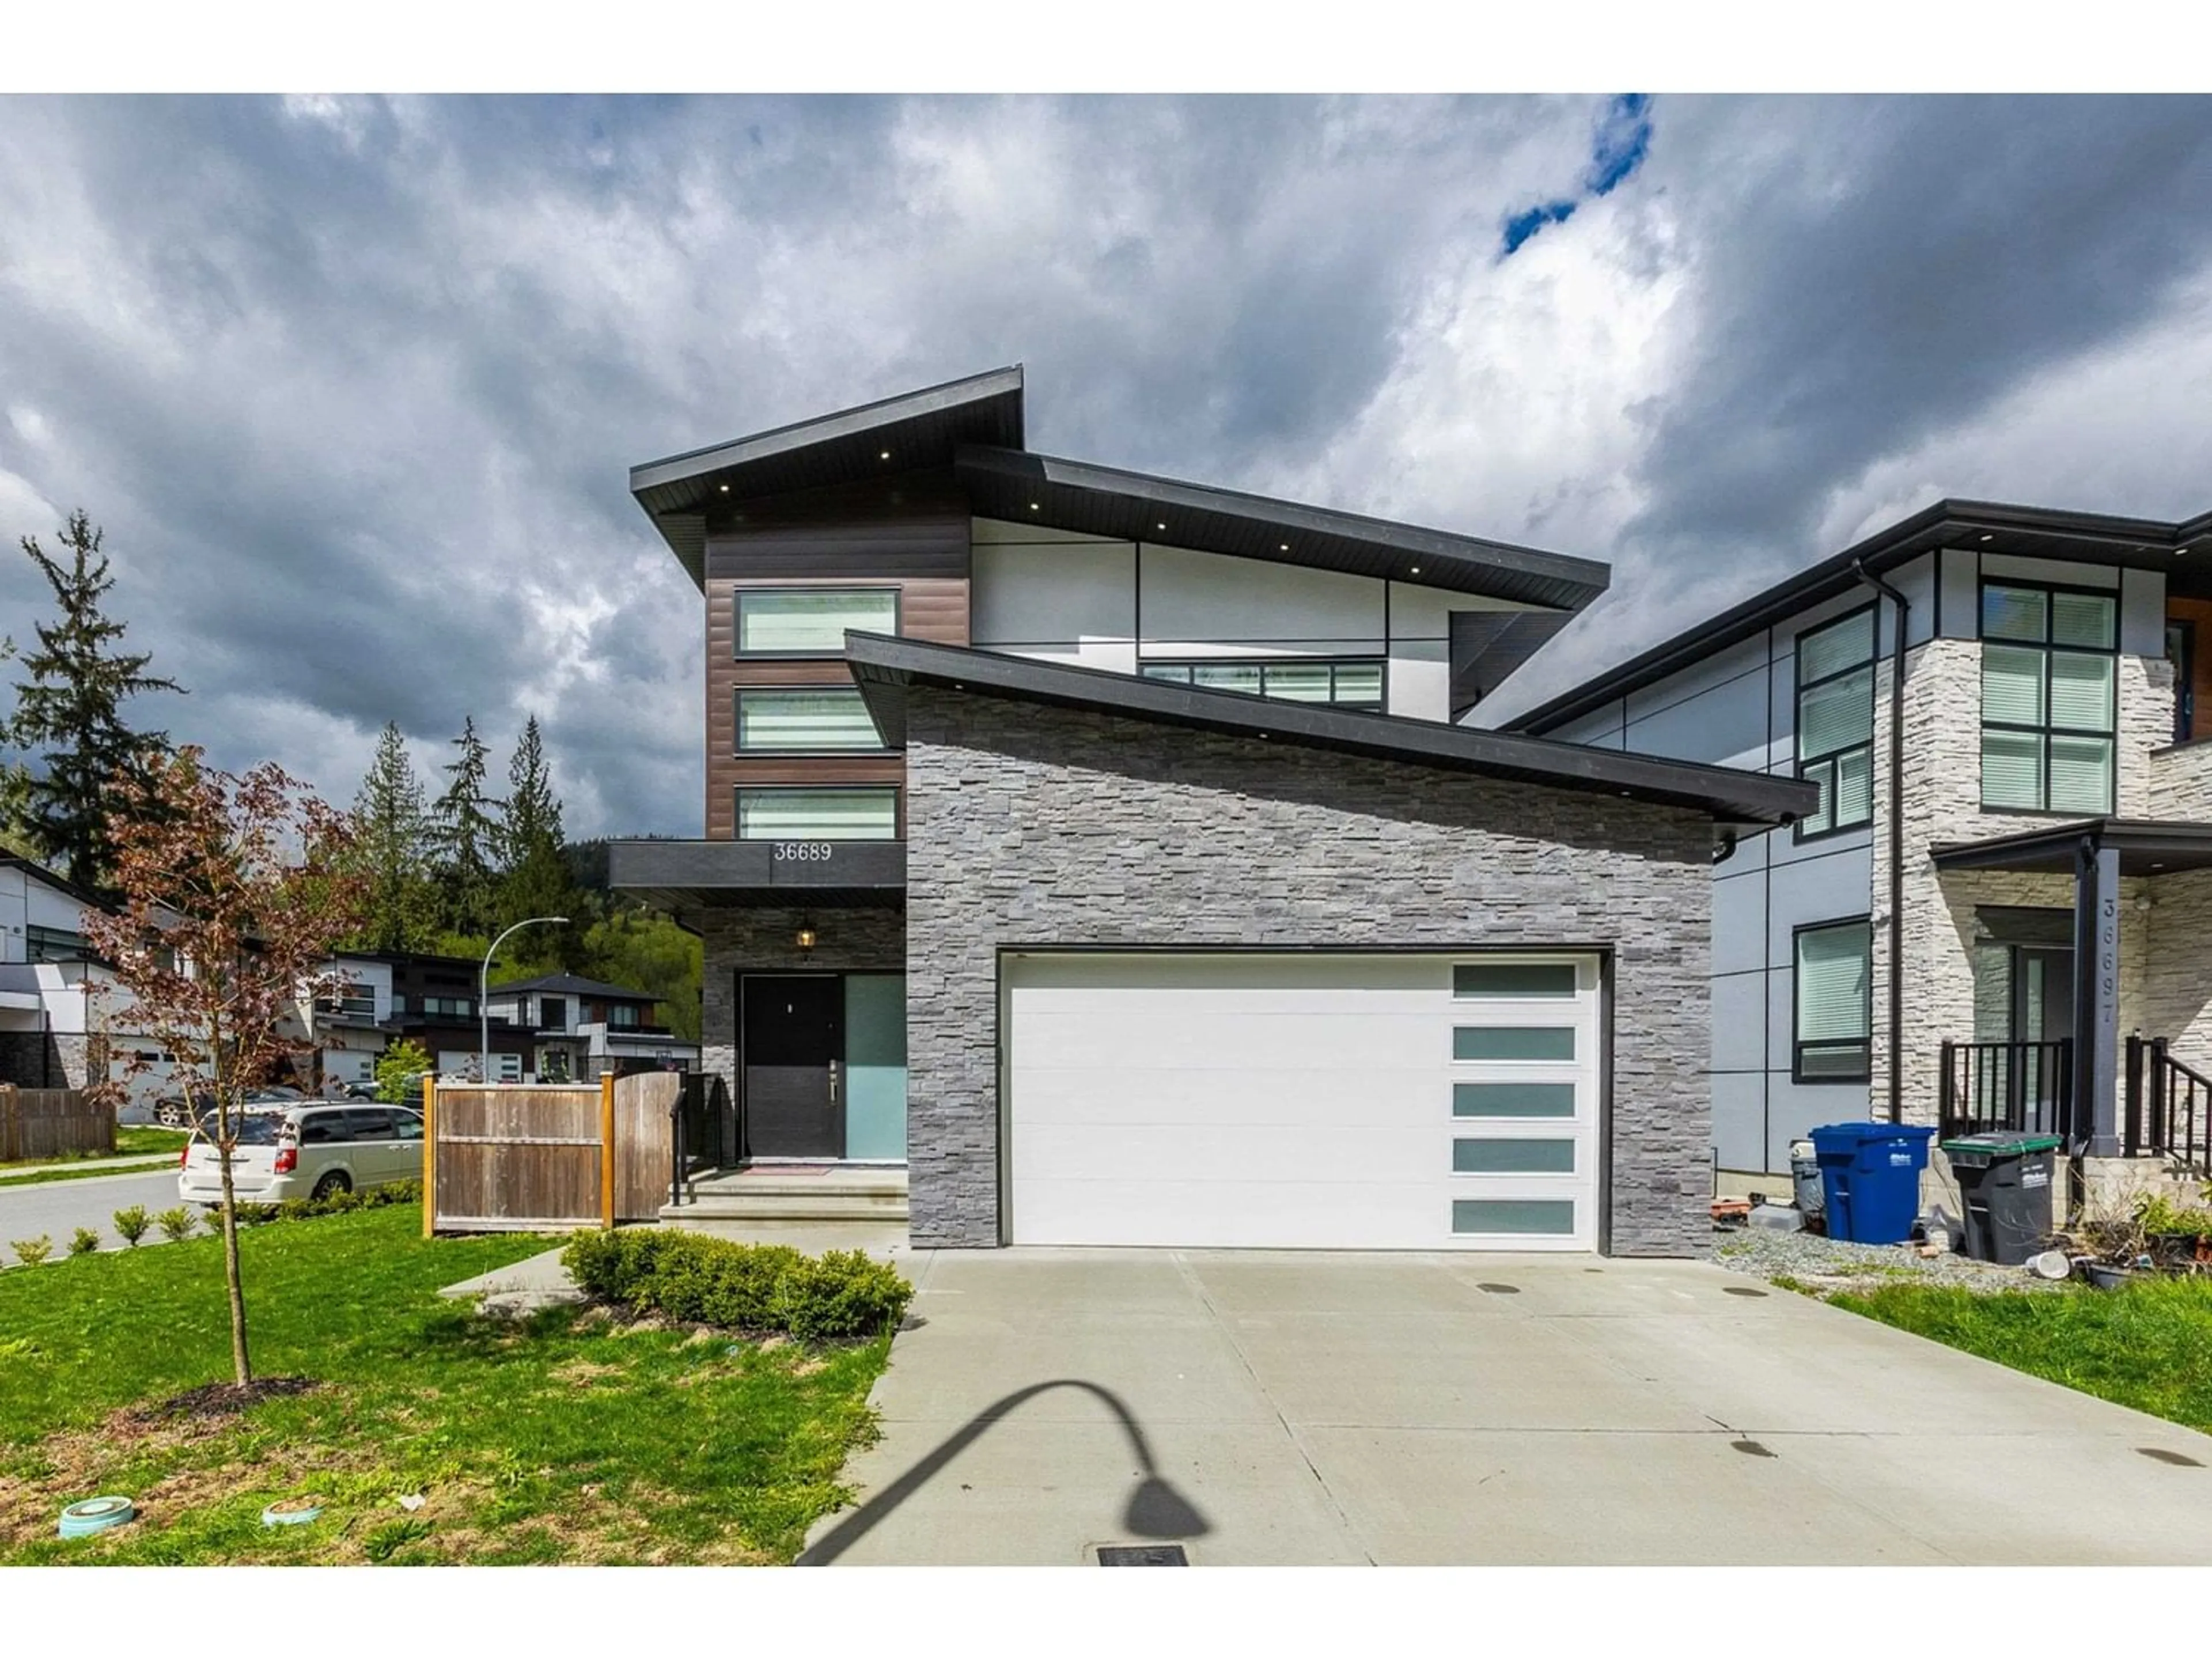 Home with brick exterior material for 36689 DIANNE BROOK AVENUE, Abbotsford British Columbia V3G0H4